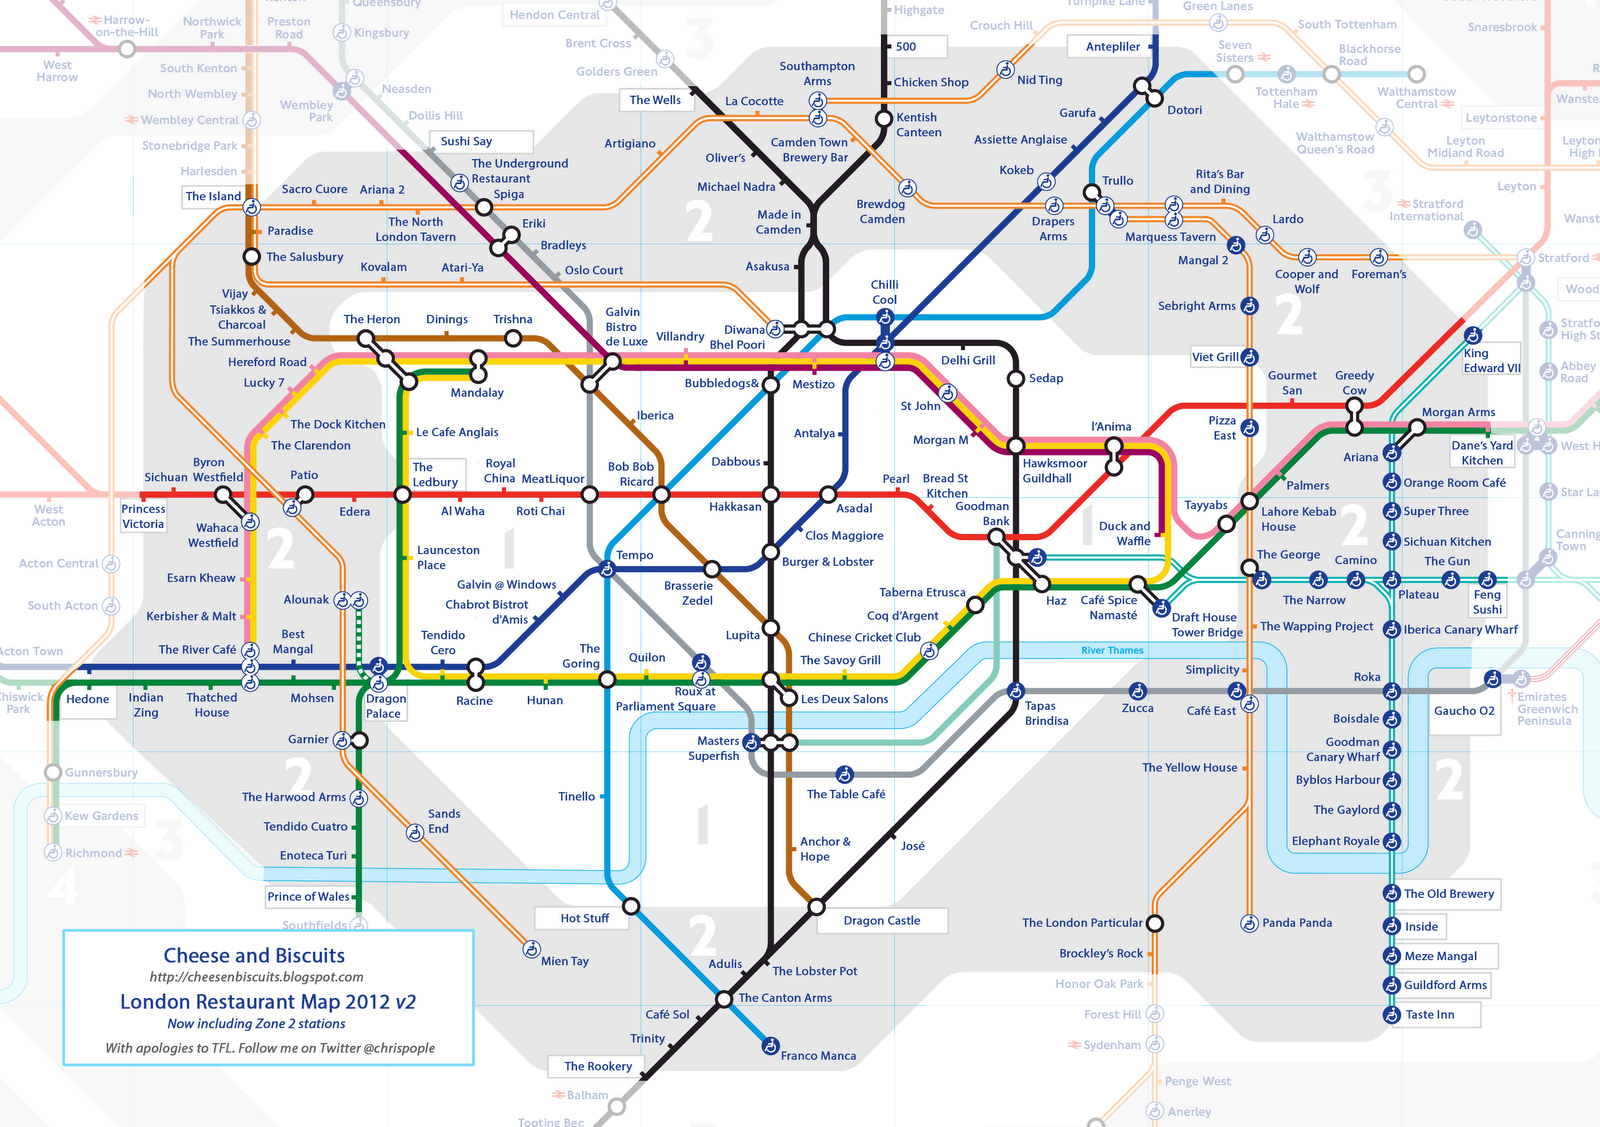 I've updated my Restaurant Tube Map to include Zone 2. Let